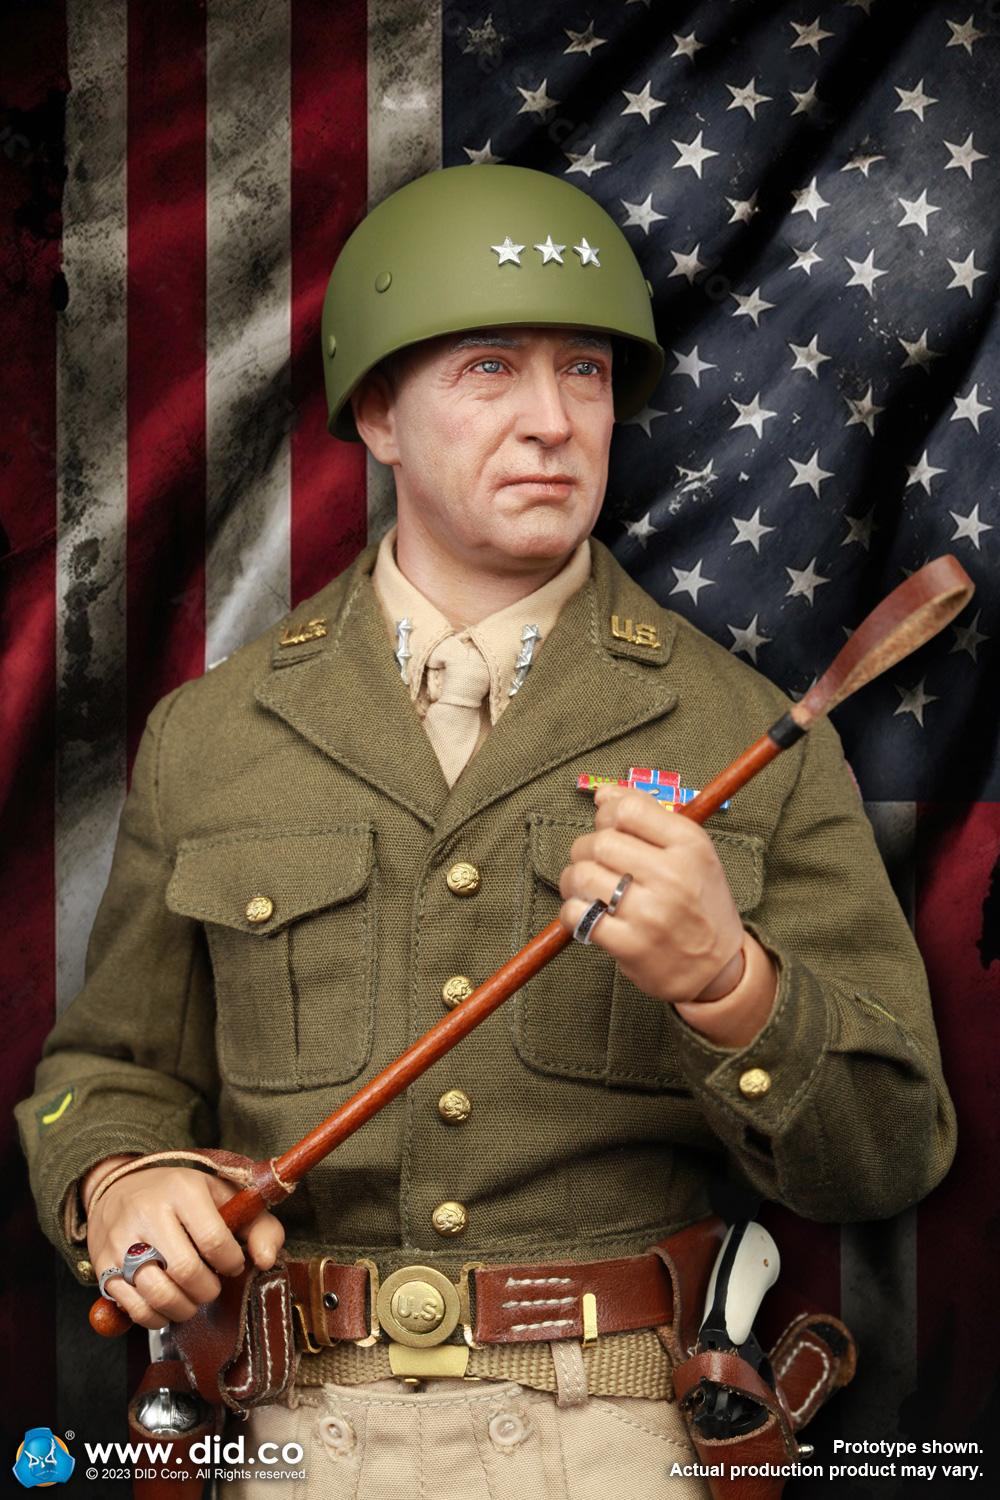 NEW PRODUCT: DiD: A80164  WWII General Of The United States Army George Smith Patton Jr.   9596